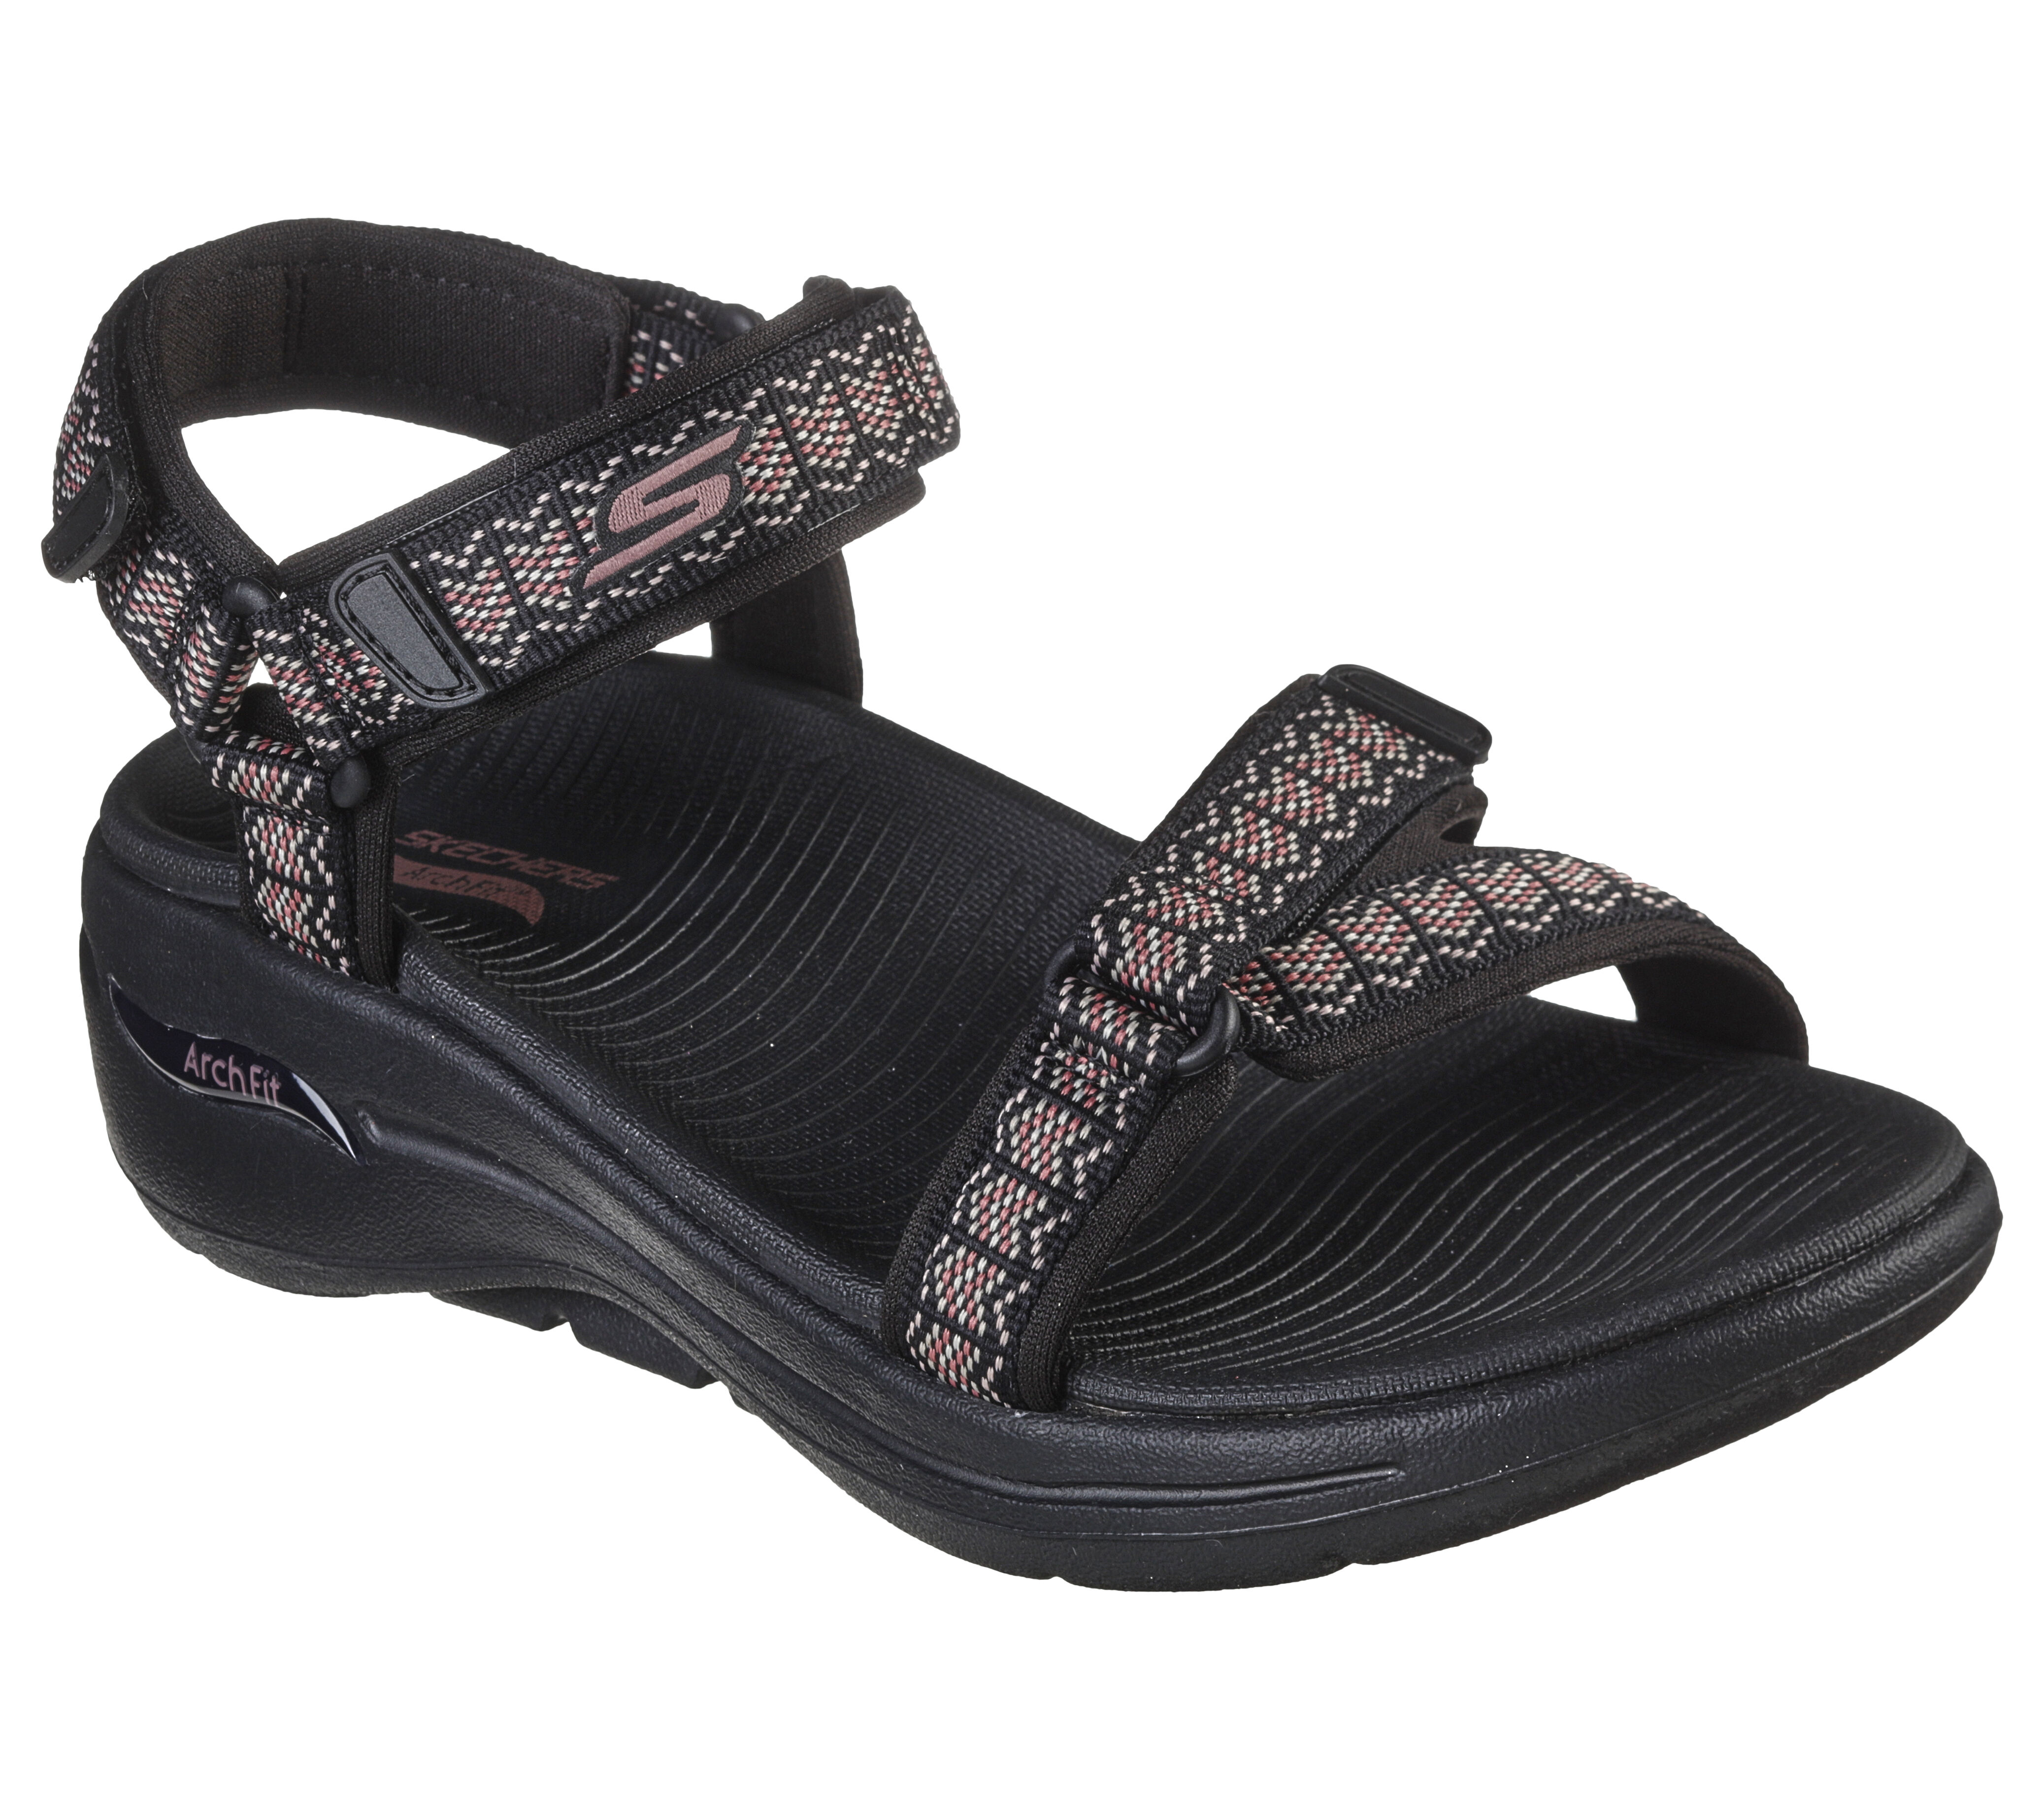 Skechers GO WALK Arch Fit - Affinity